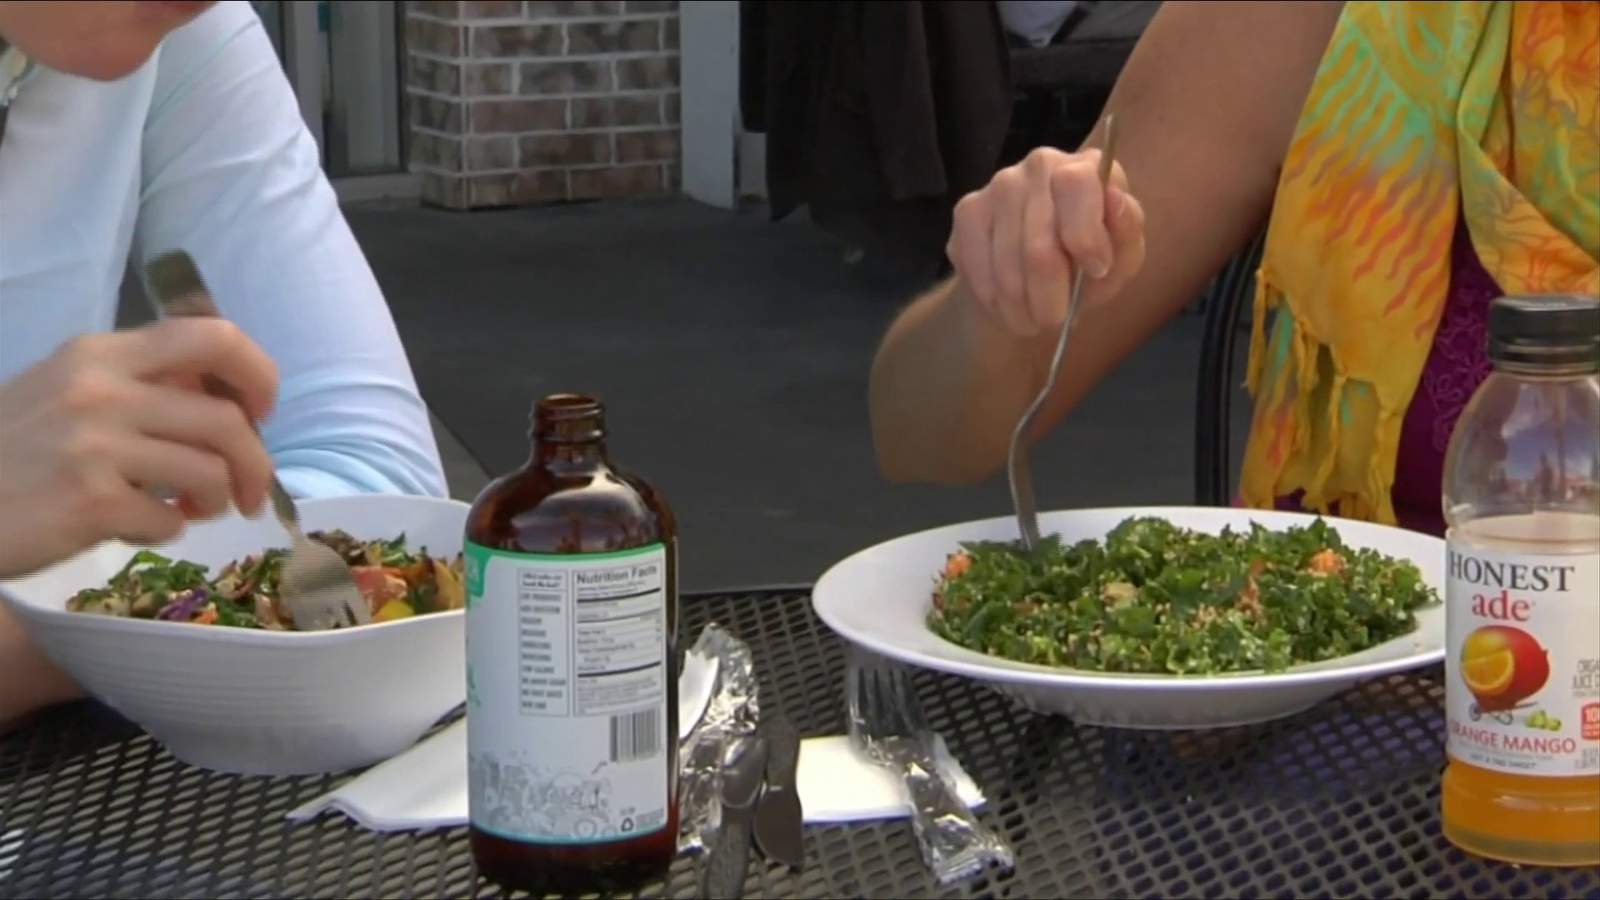 Can a healthy diet help your body fight COVID-19? Virginia Tech nutrition expert says yes